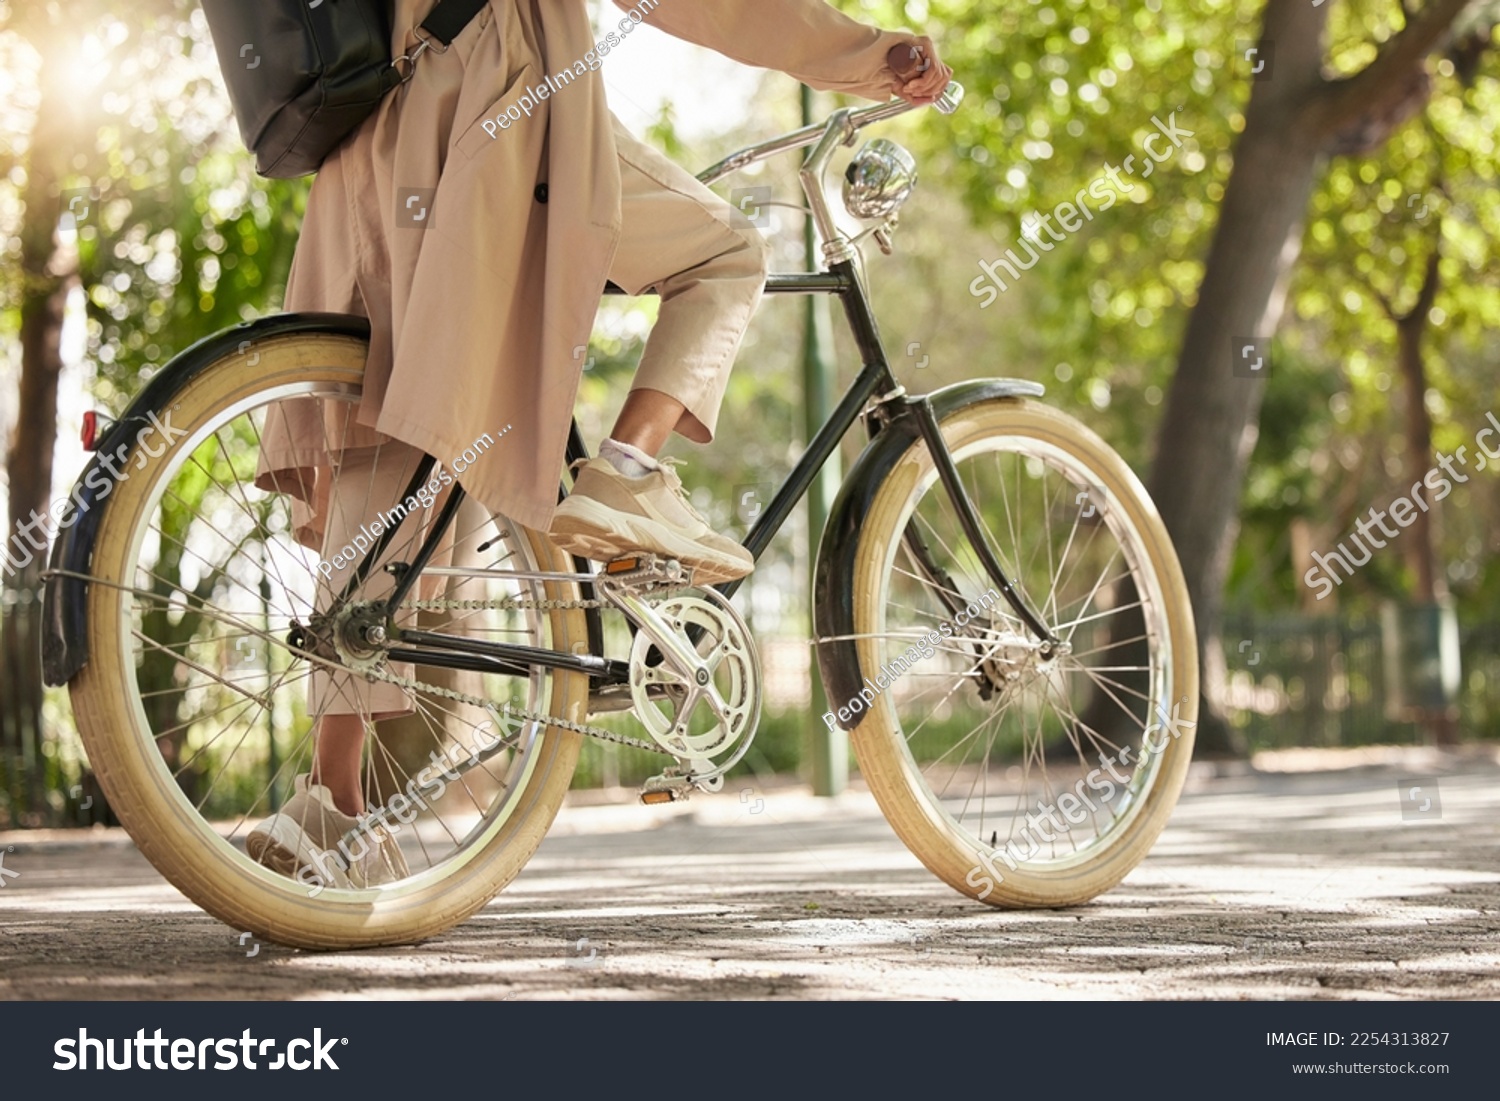 Bicycle, closeup and feet of casual cyclist travel on a bike in a park outdoors in nature for a ride or commuting. Exercise, wellness and lifestyle student cycling as sustainable transport #2254313827